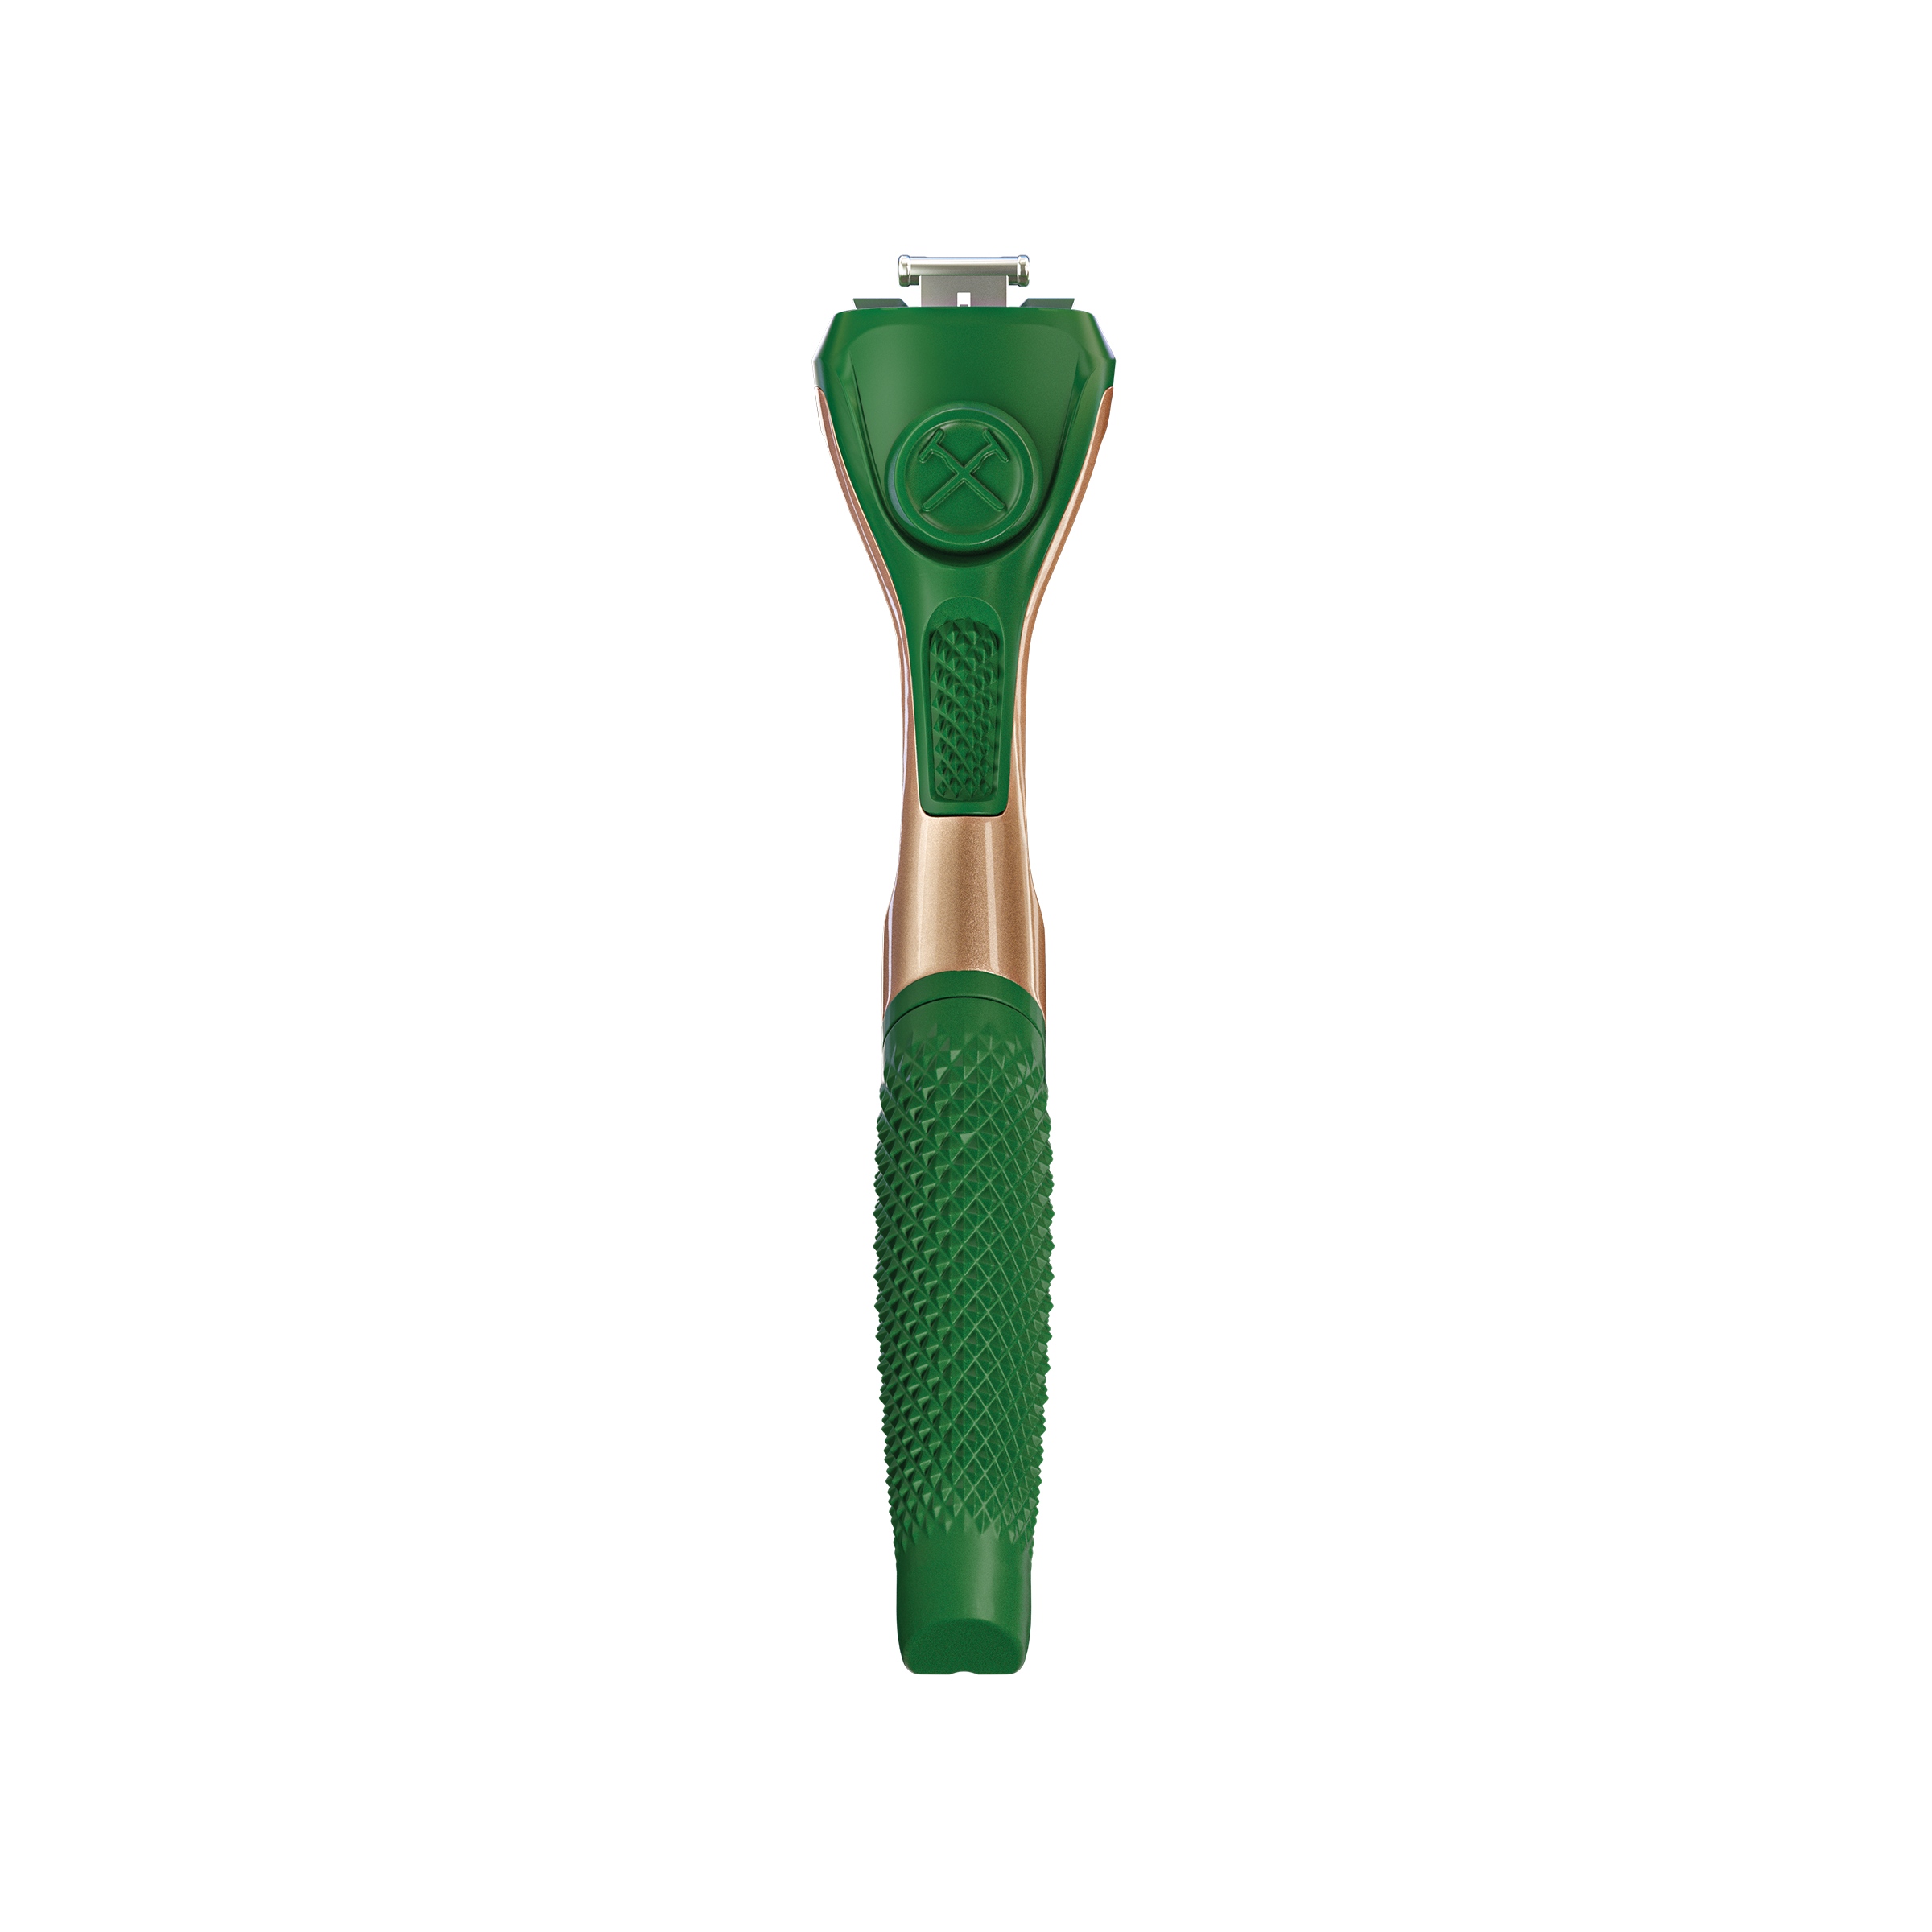 Limited edition shaving handle in mistletoe green with copped accents